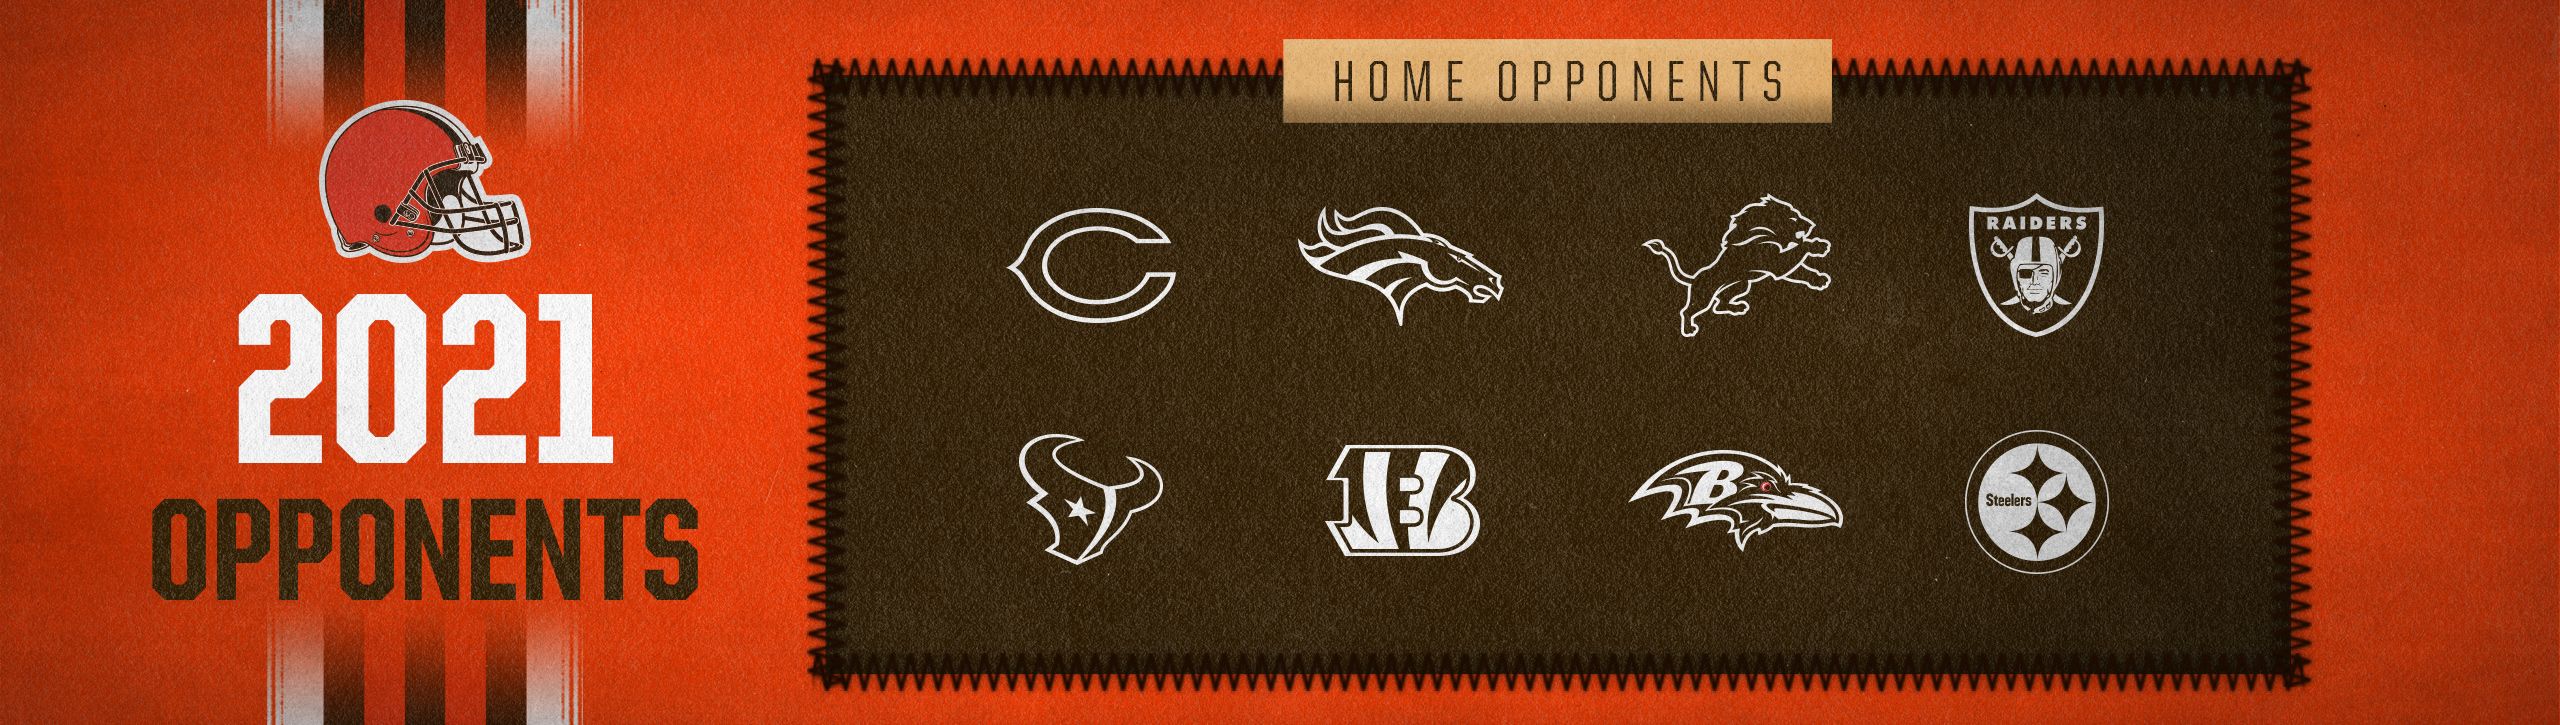 Browns Single Game Tickets | Cleveland Browns - clevelandbrowns.com